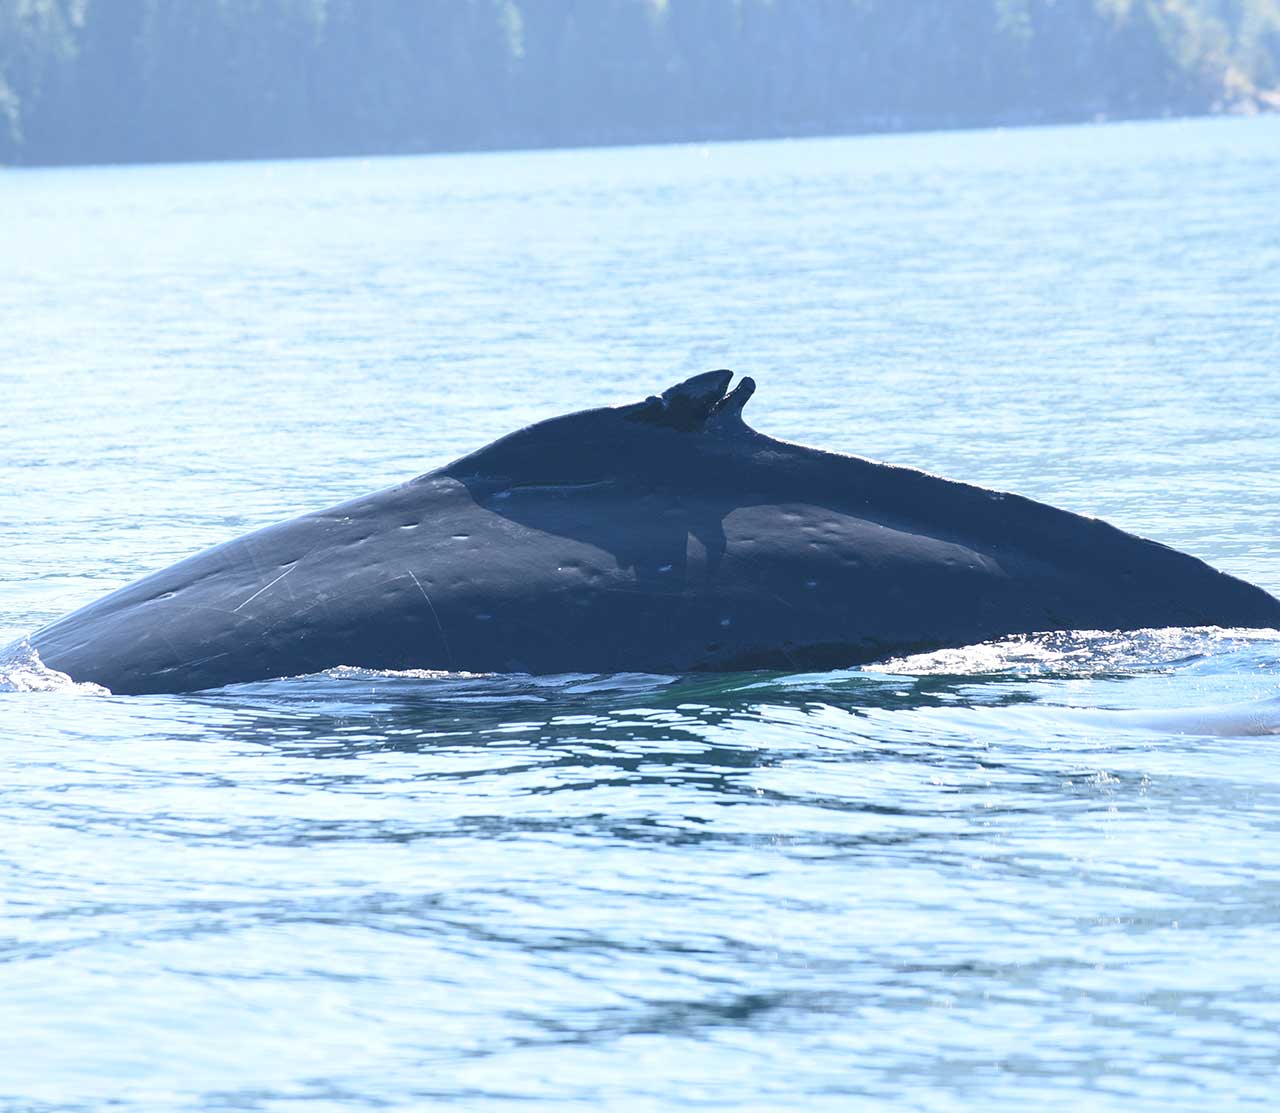 mers marine education research society whale kc out in water